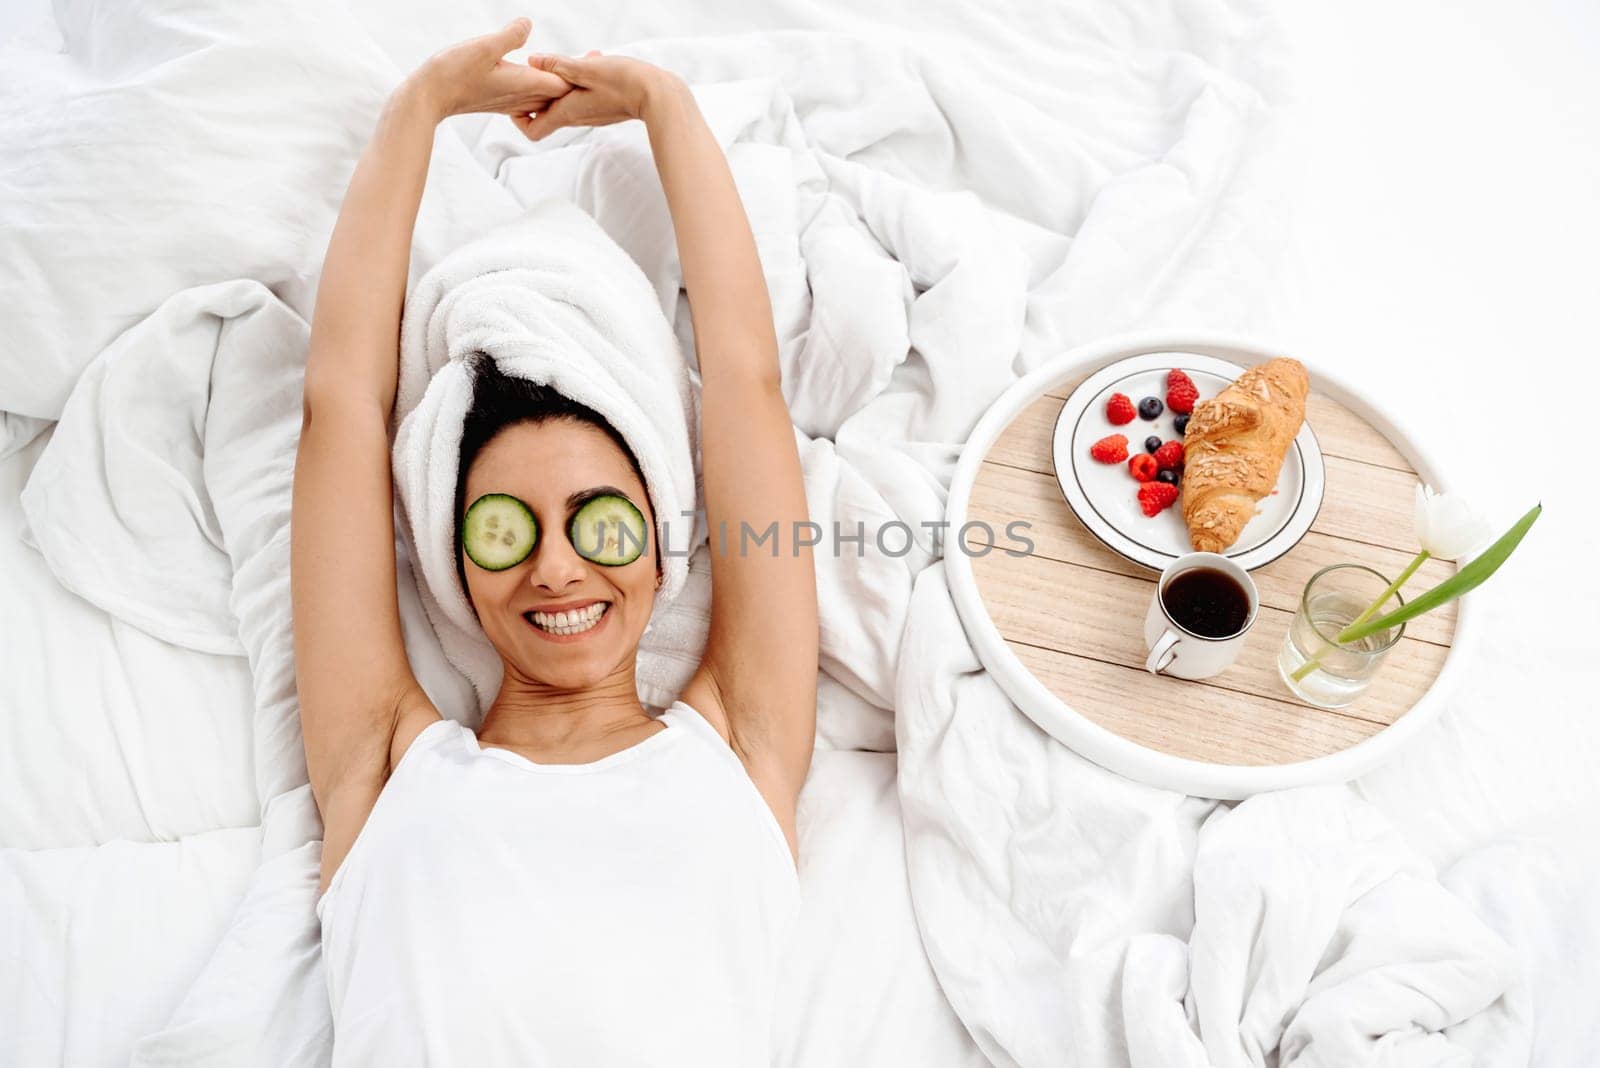 Happy woman stretches in bed in the morning with a breakfast tray. She just got out of the shower and put cucumber slices on her eyes as a facial. The girl lies on a snow-white bed, view from above